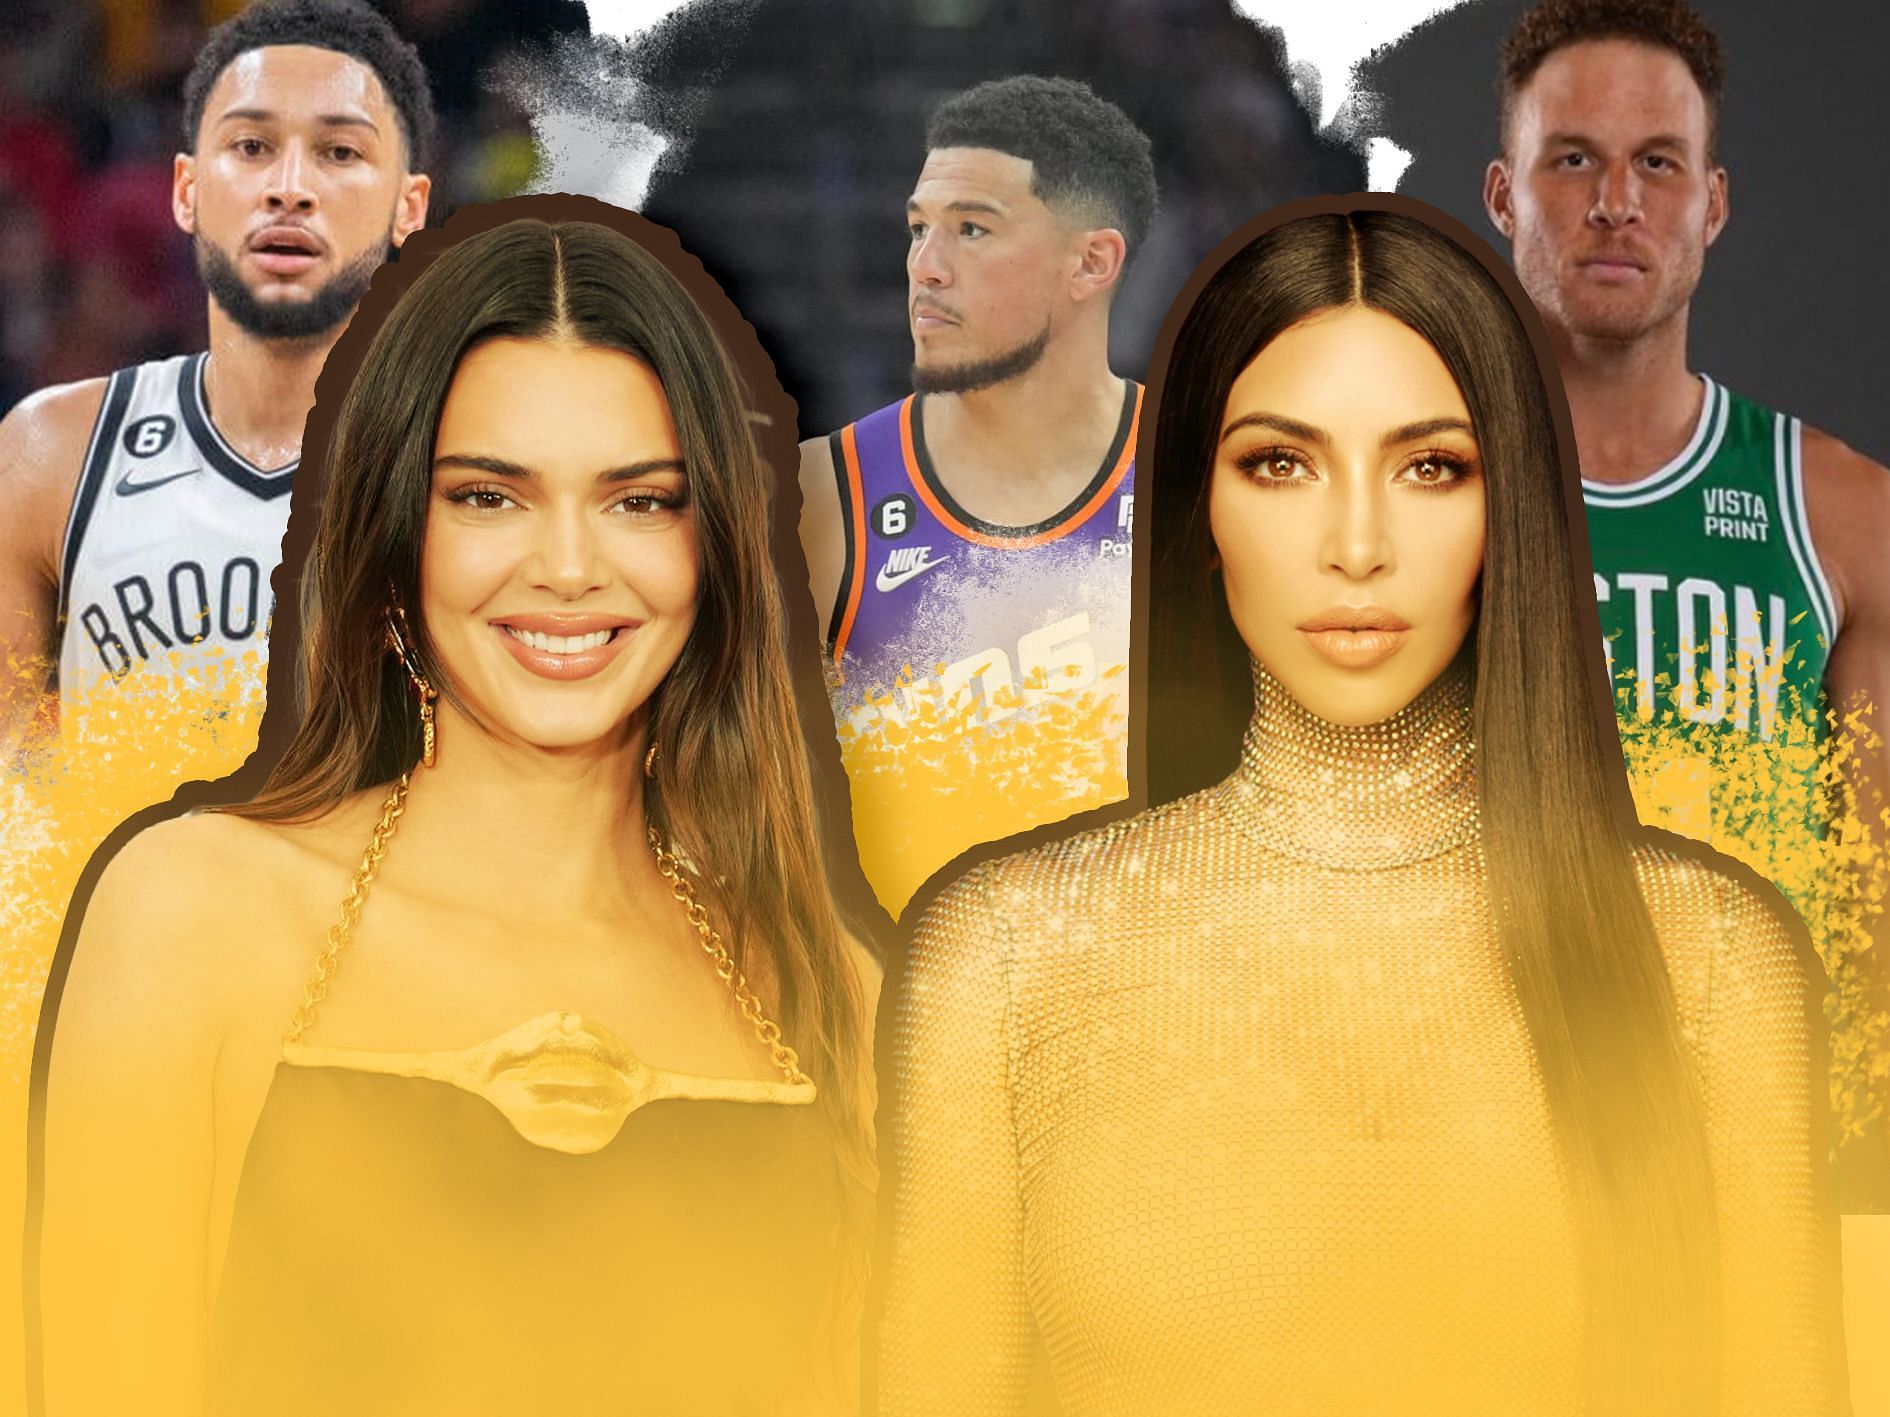 Kim Kardashian trolled her little sister Kendall Jenner about her NBA dating history.